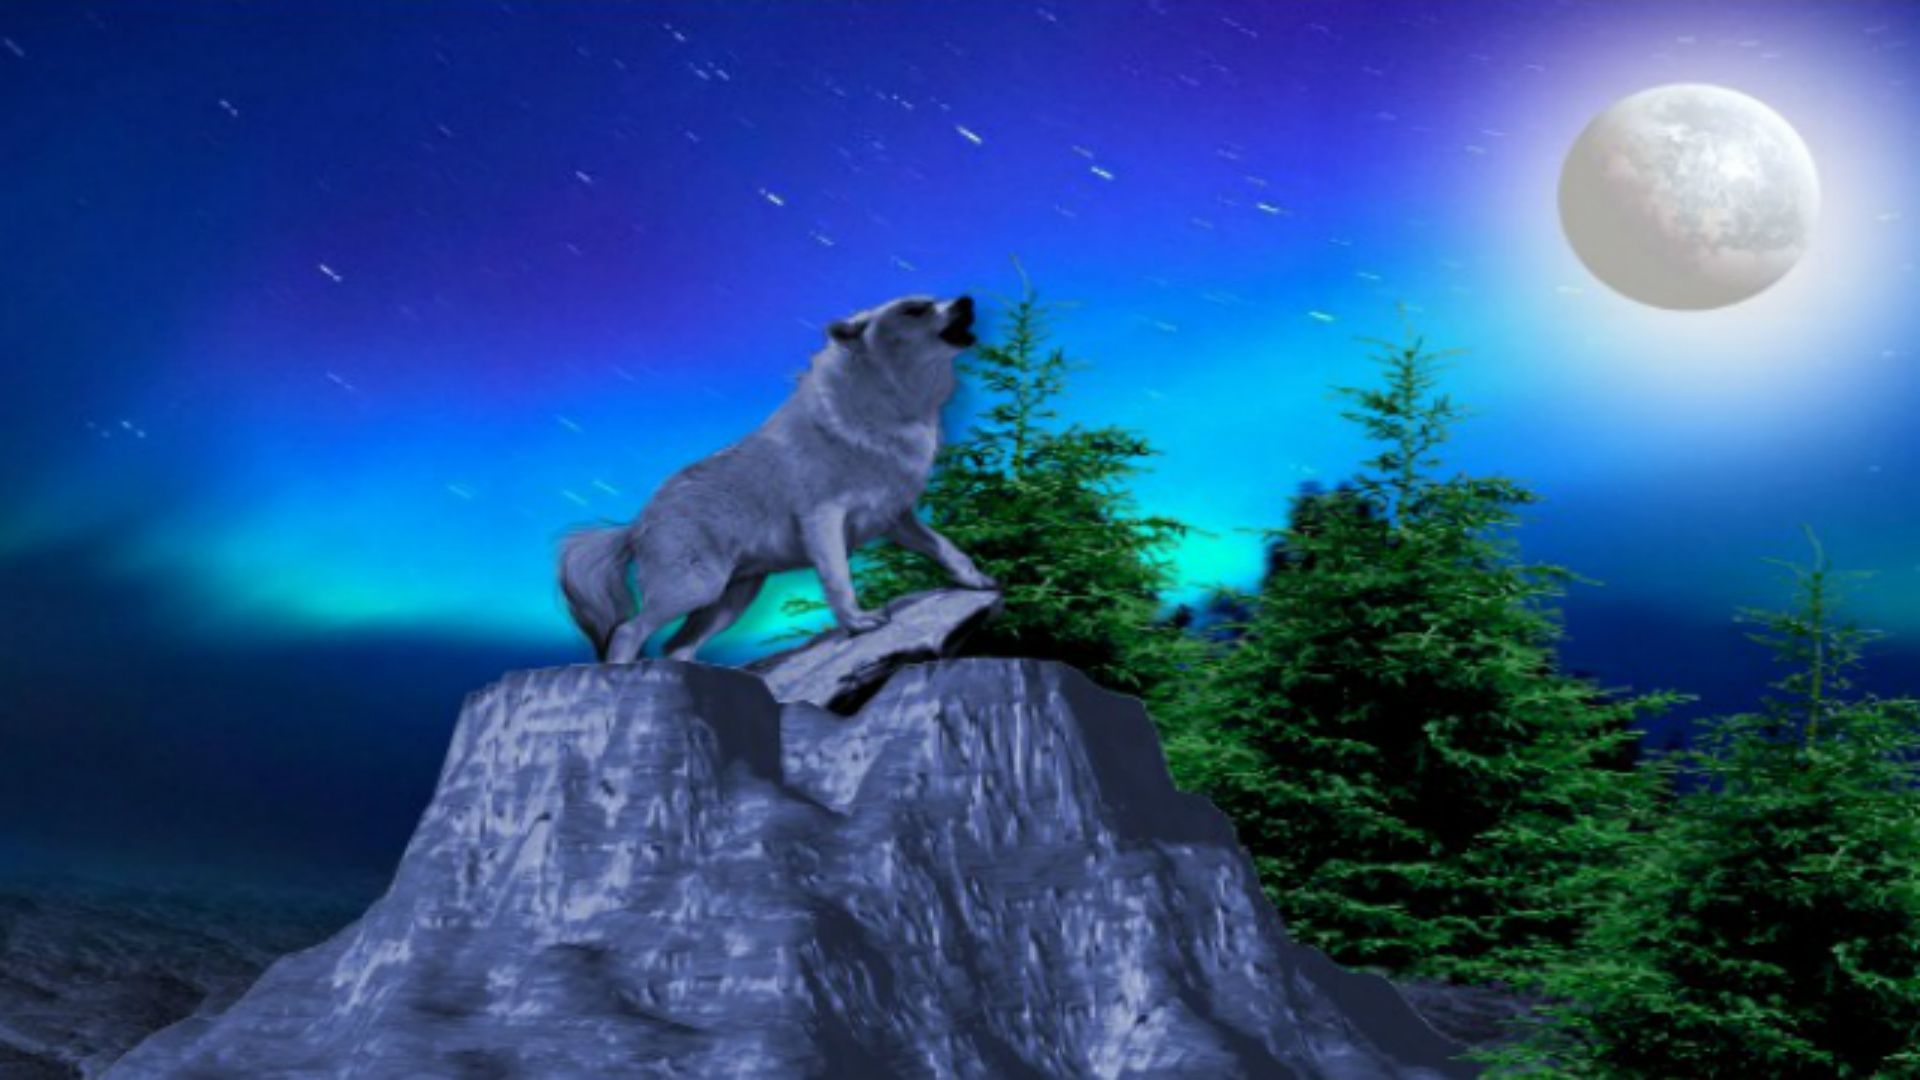 Download Wolf Howling At The Moon Desktop Backgrounds #oyy91 Free ...